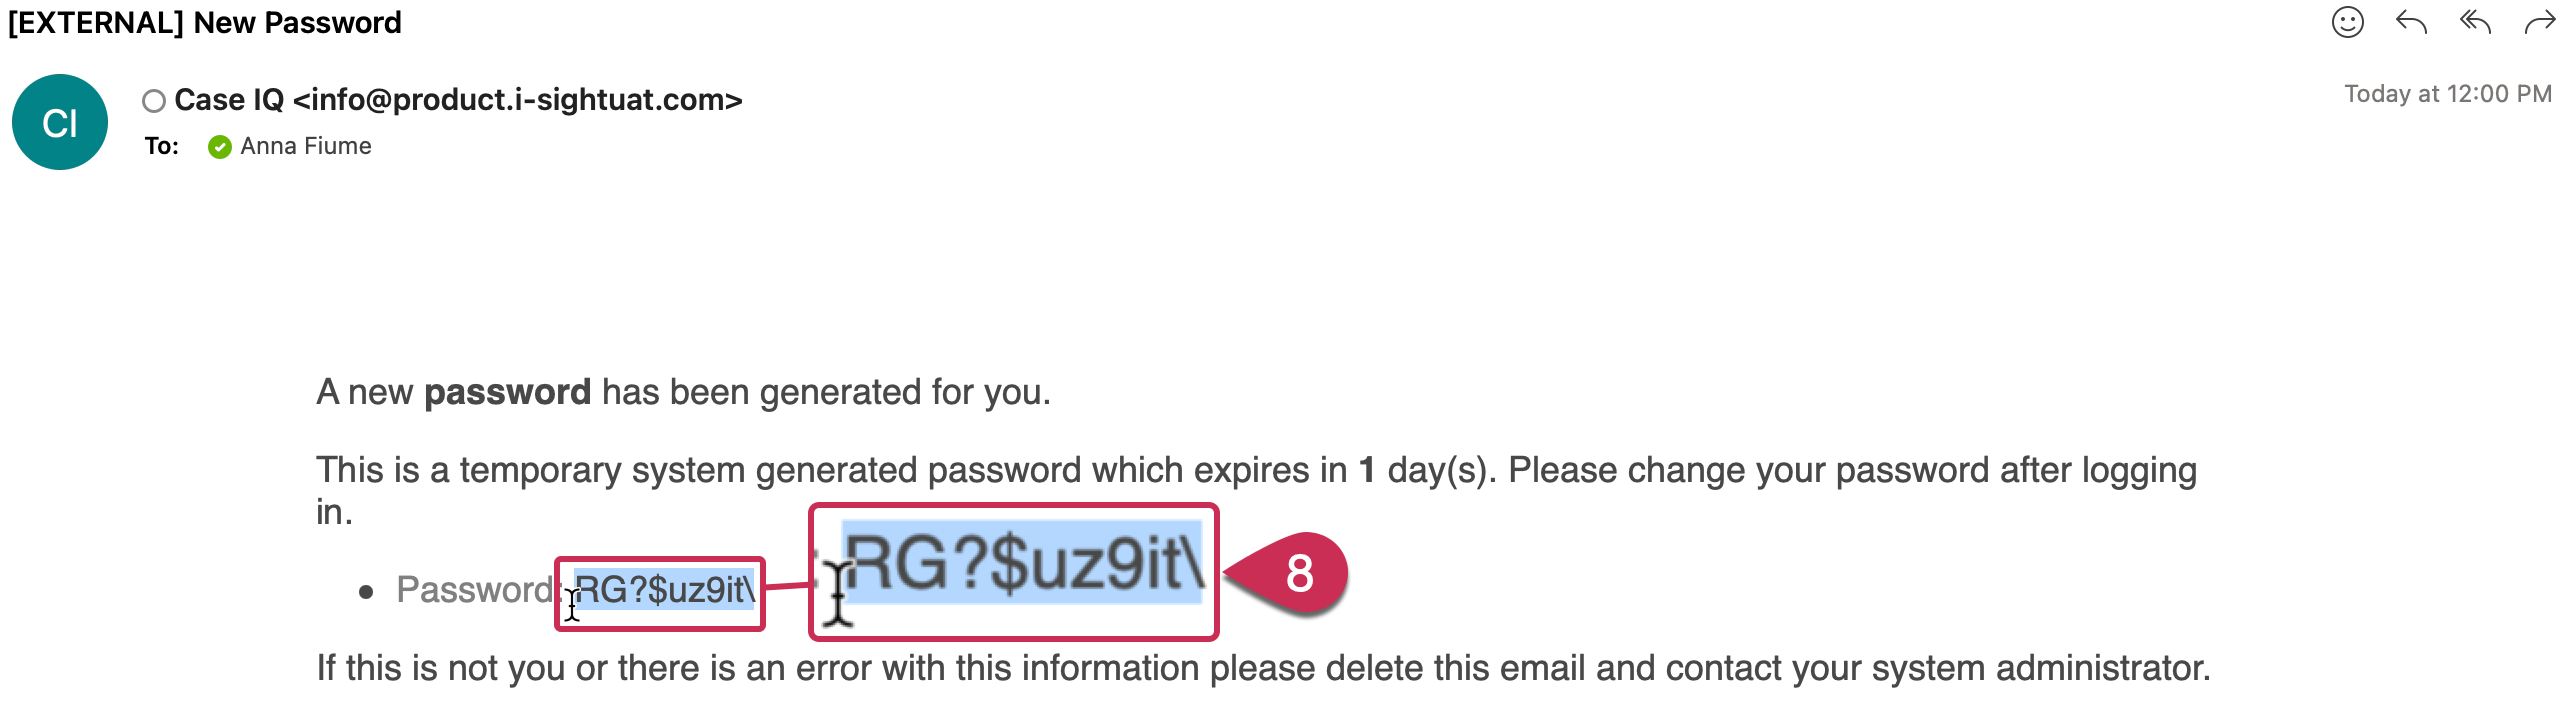 Copying the temporary password in the New Password email.